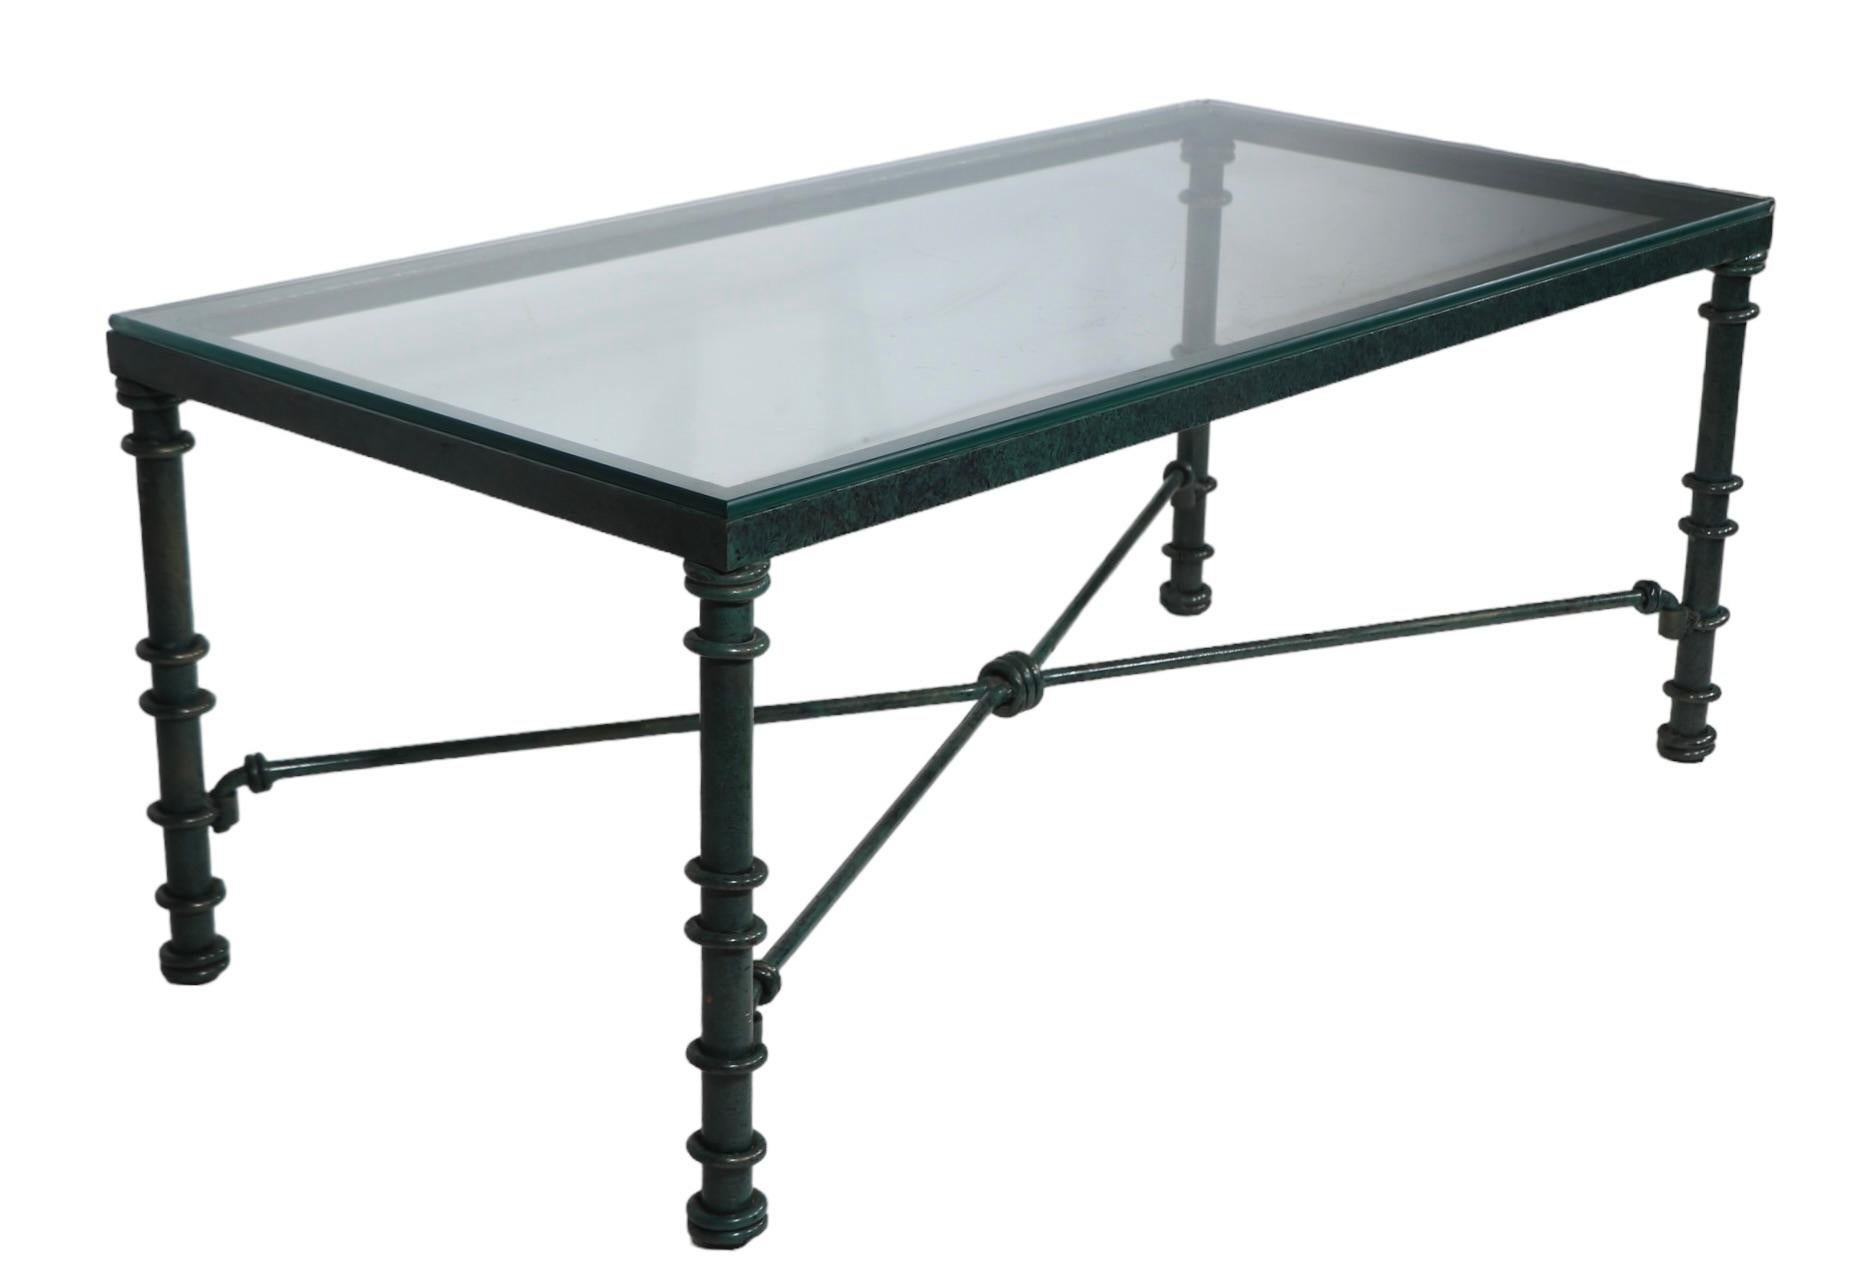 American Brutalist Faux Verdigris Finish Glass Top Coffee Table c. 1970/1980's For Sale